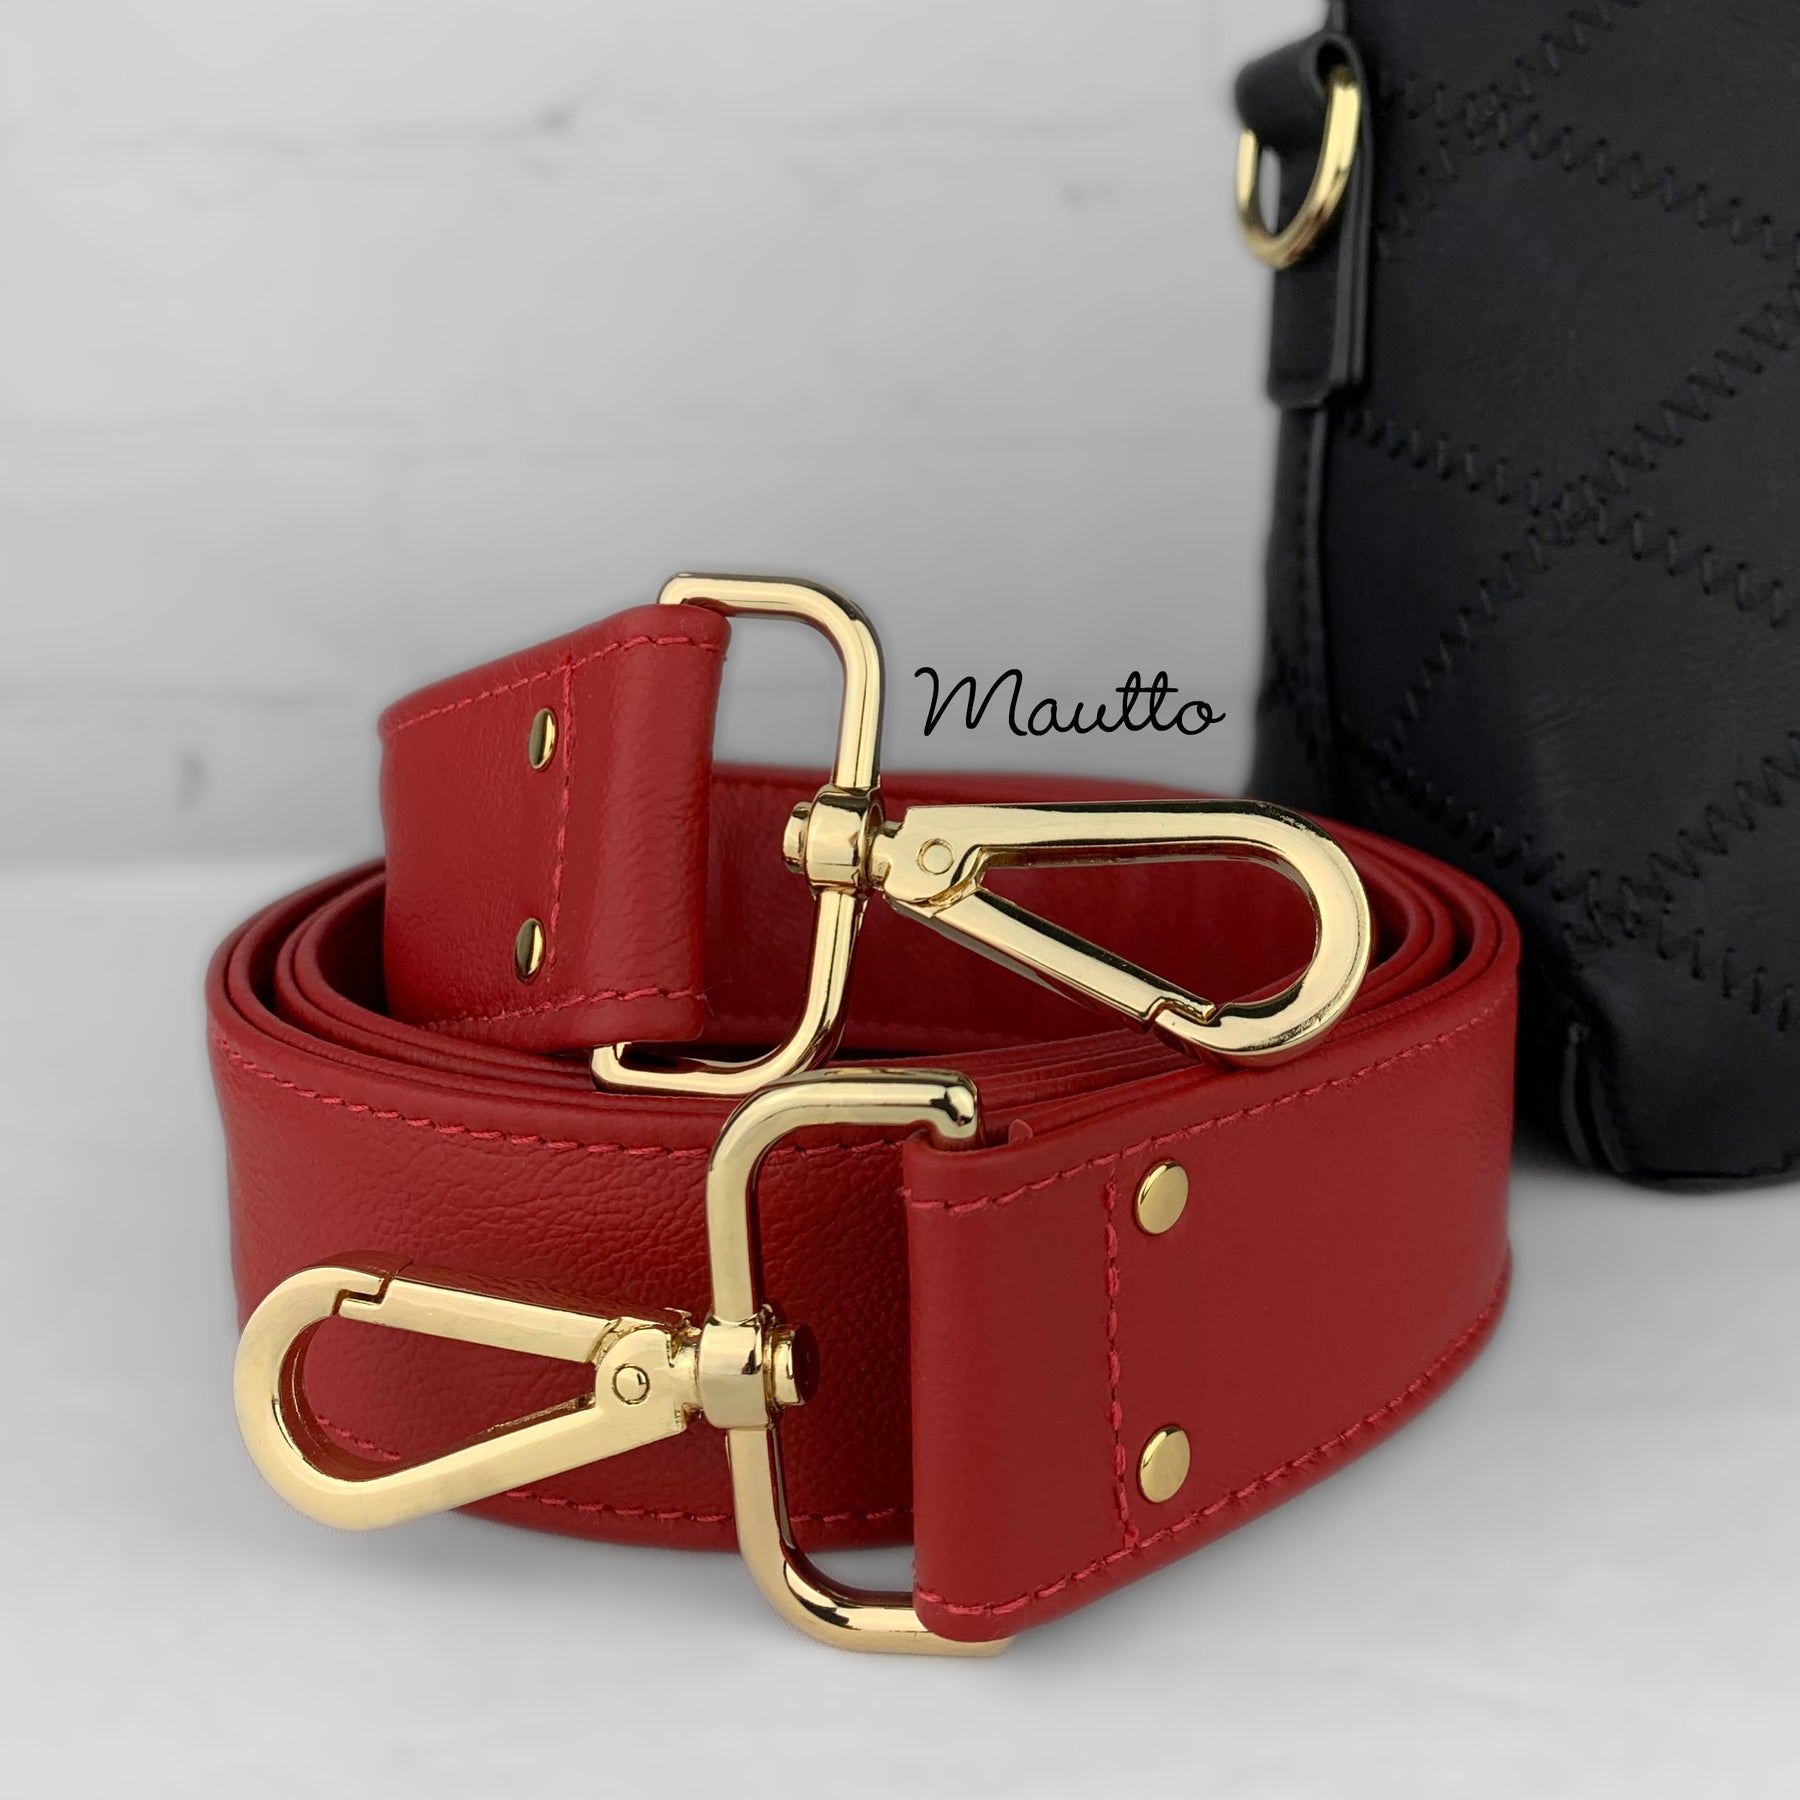 Leather Wrist Strap - 1/2 inch (13mm) Wide - Gold, Silver, Black Clip Light Tan Leather / Gold-Tone